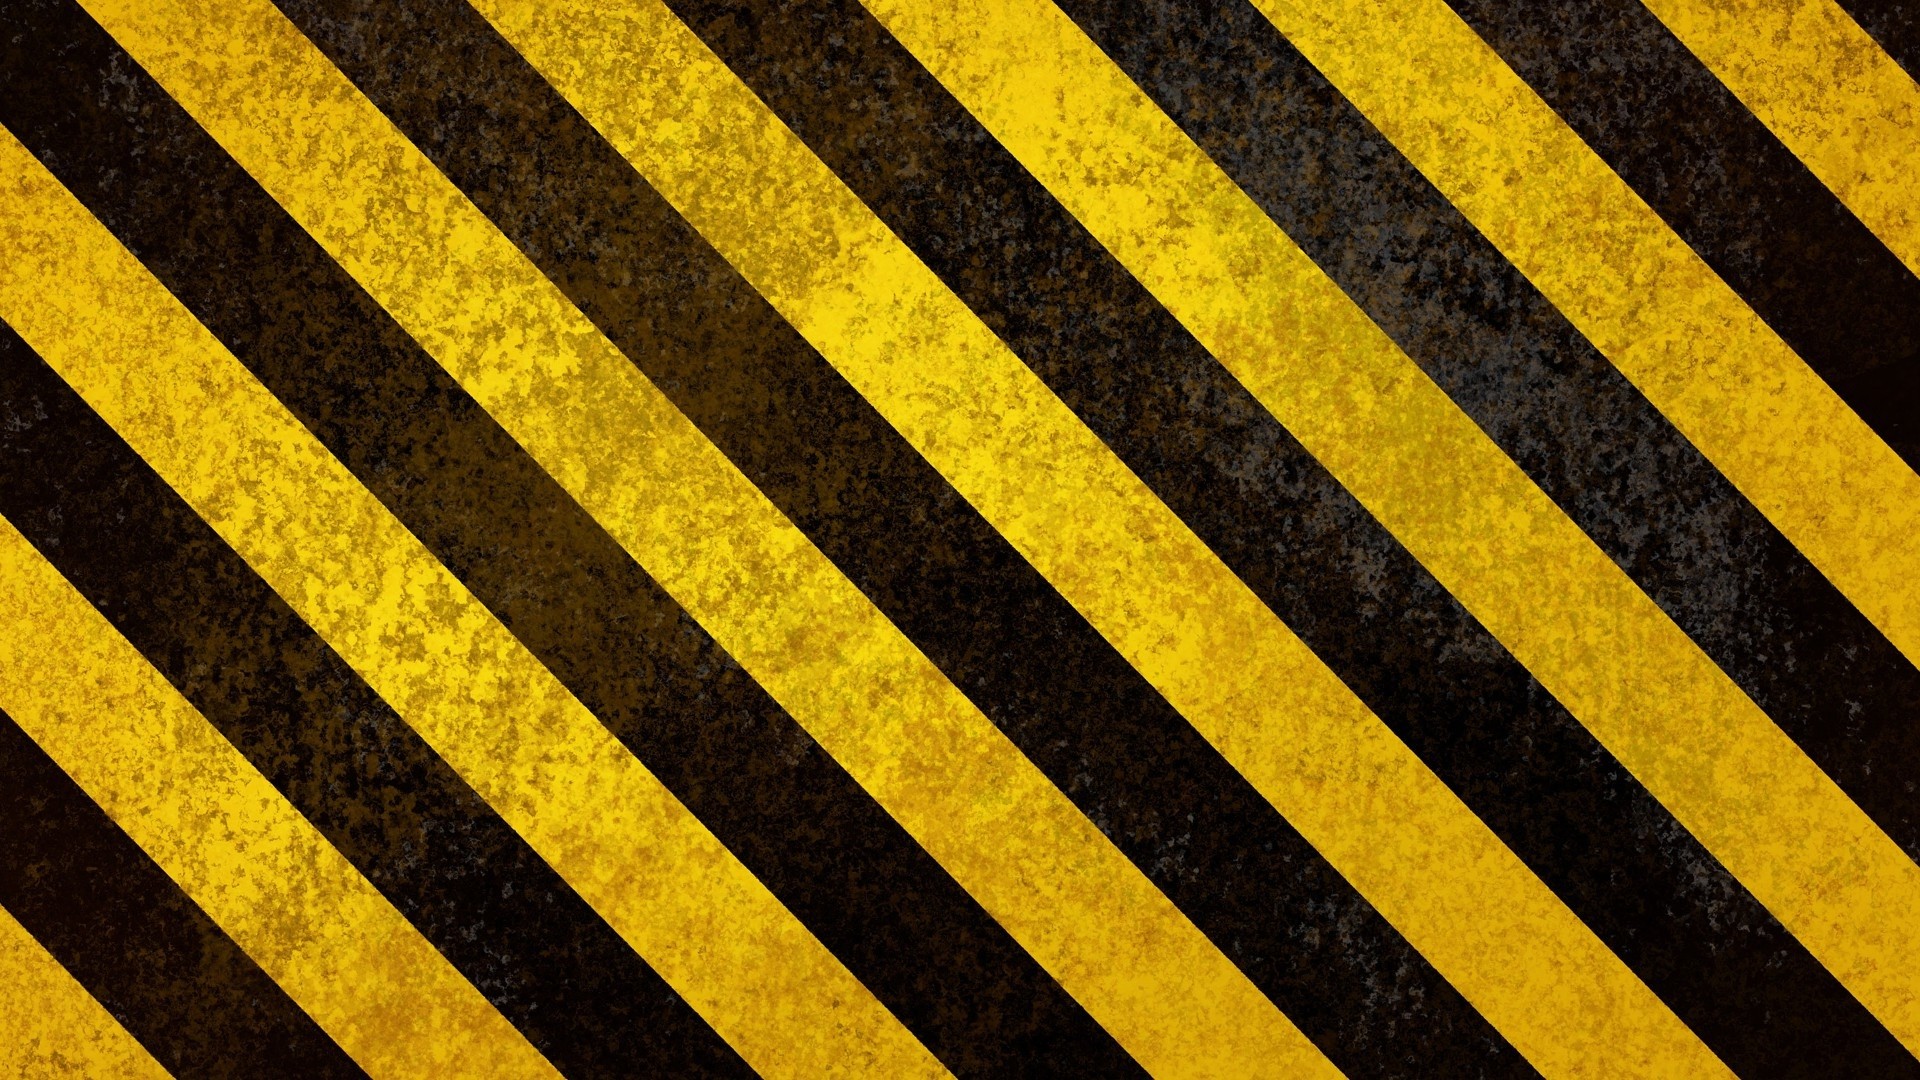 Download wallpaper 1350x2400 barricade tape, caution tape, warning tape,  inscription, yellow iphone 8+/7+/6s+/6+ for parallax hd background